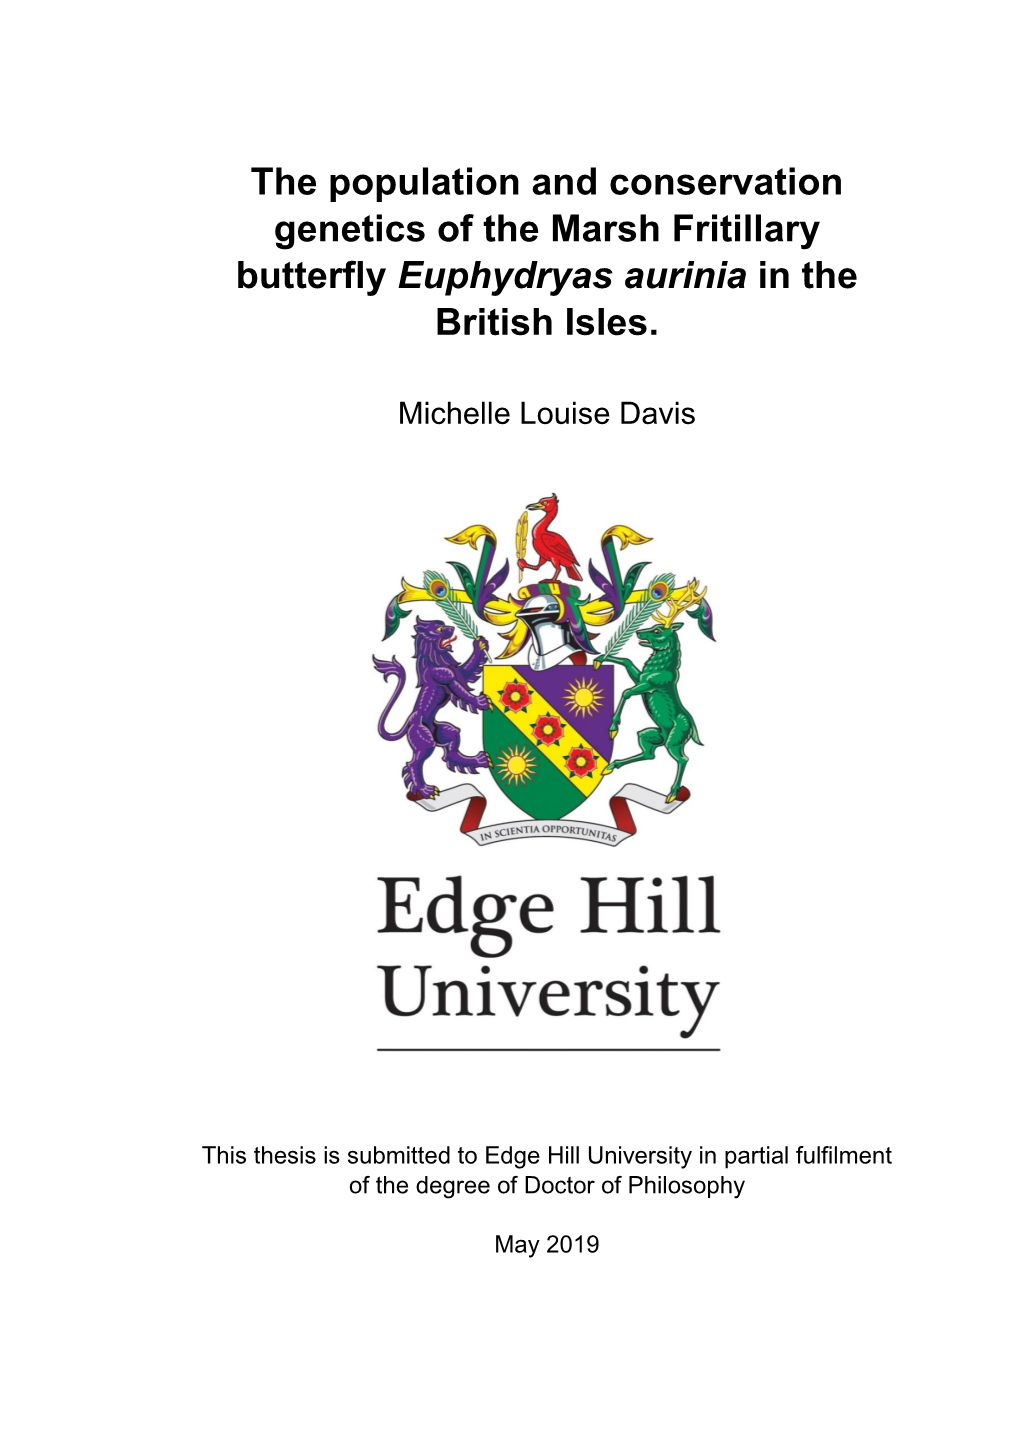 The Population and Conservation Genetics of the Marsh Fritillary Butterfly Euphydryas Aurinia in the British Isles